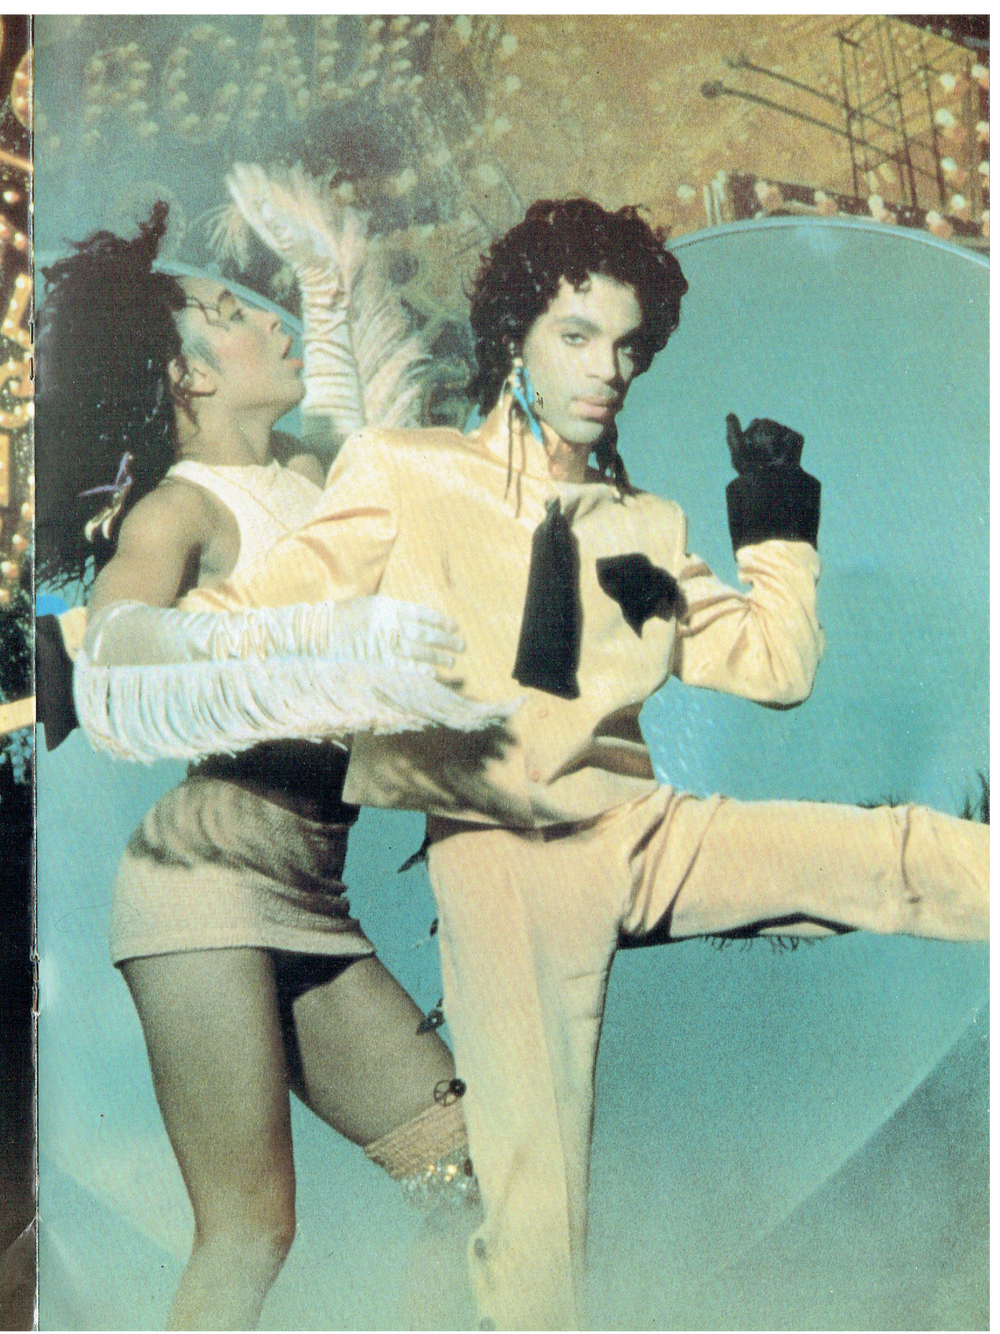 Prince – The Crystal Ball Magazine Special Edition July '88